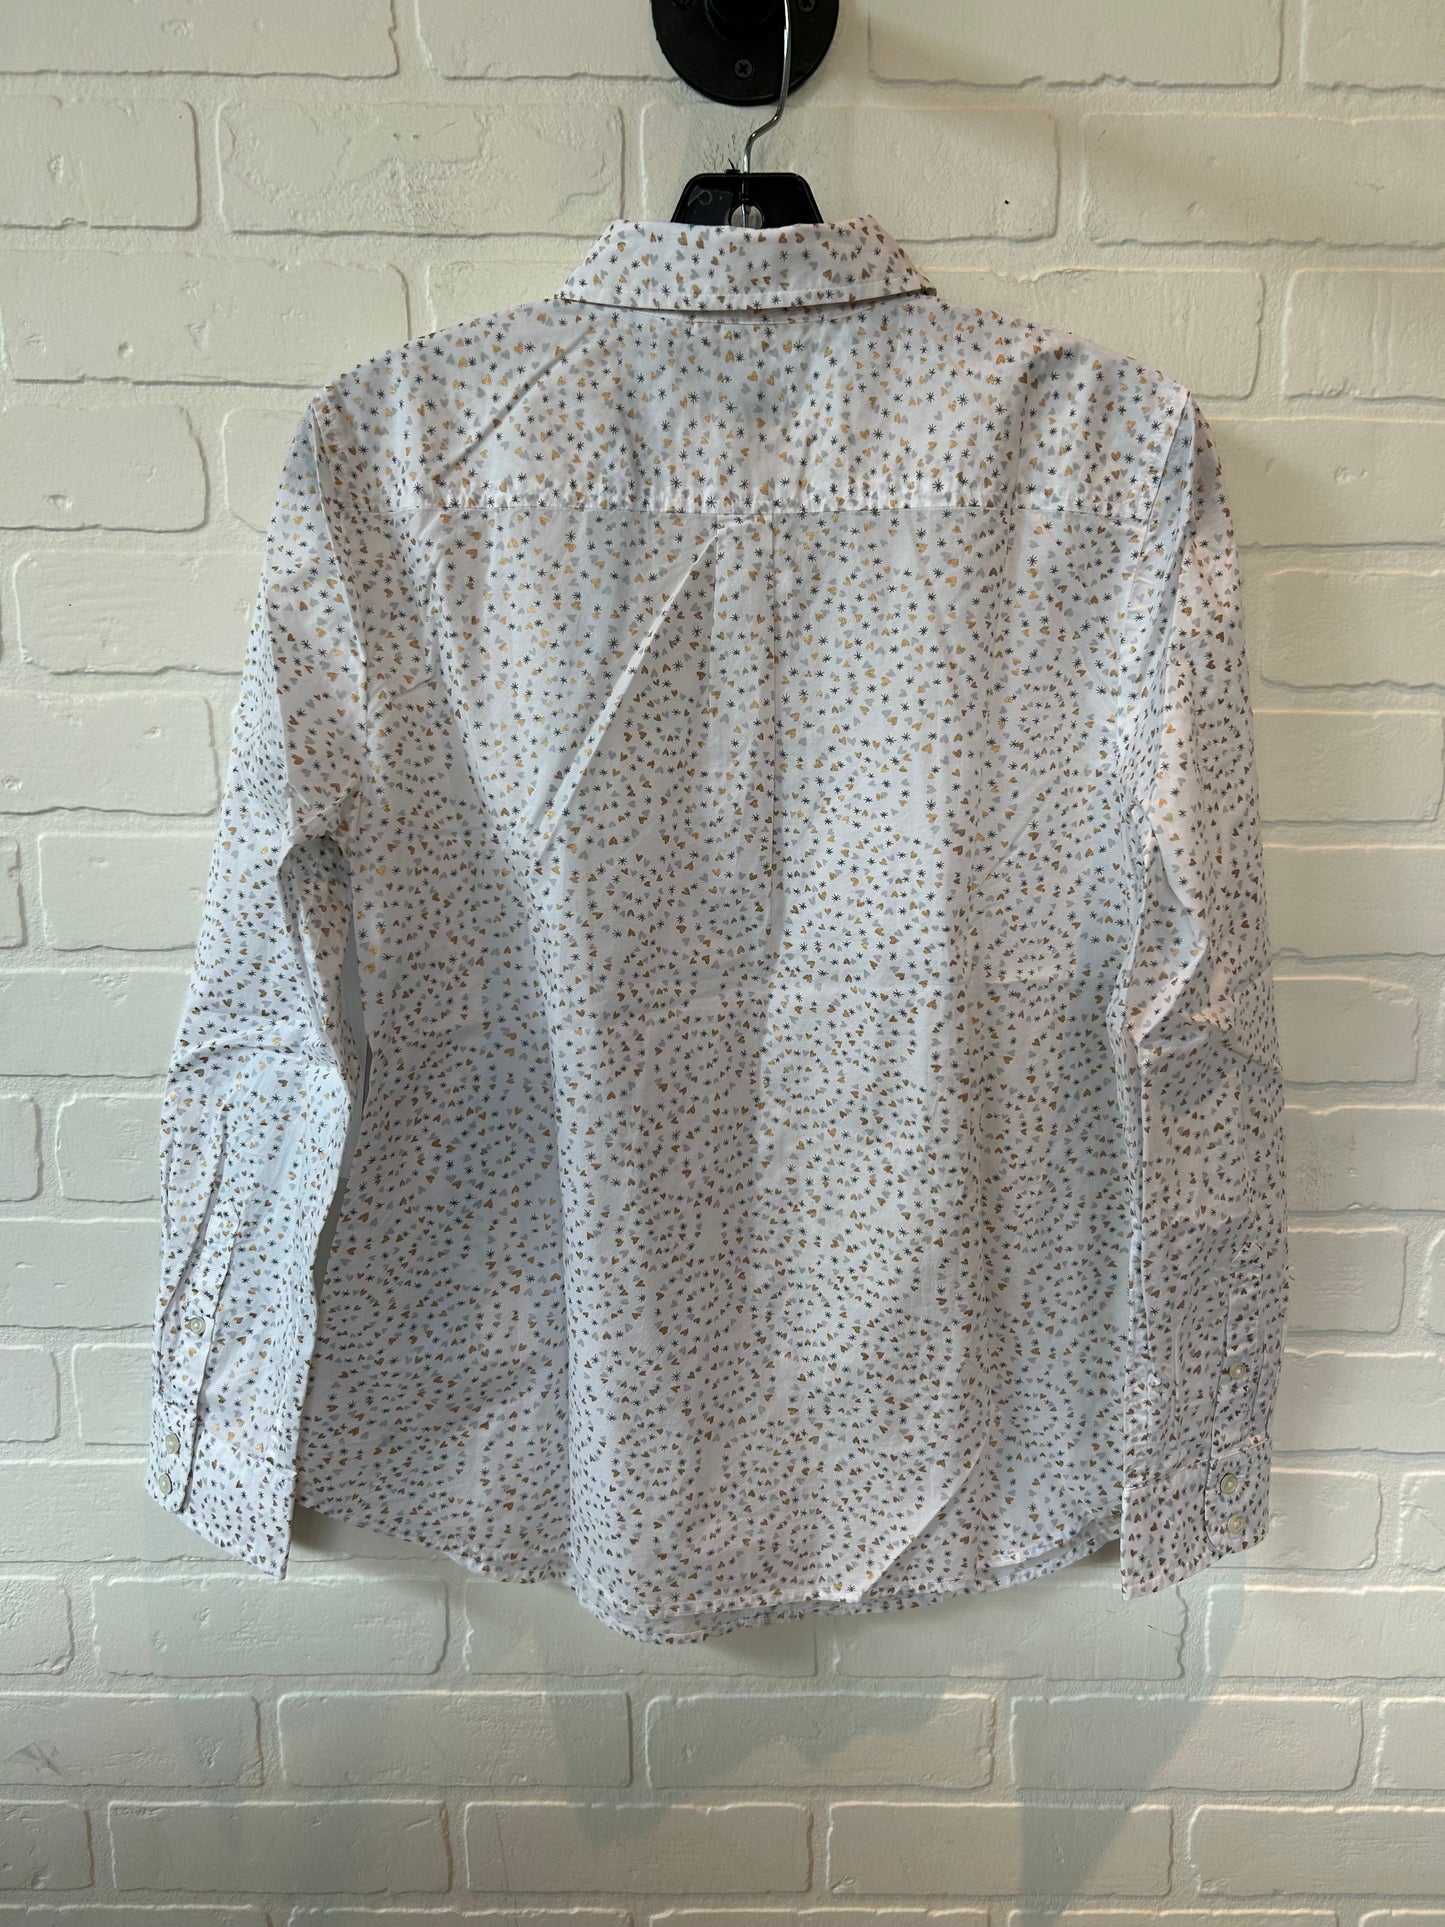 Grey & White Top Long Sleeve Talbots, Size M